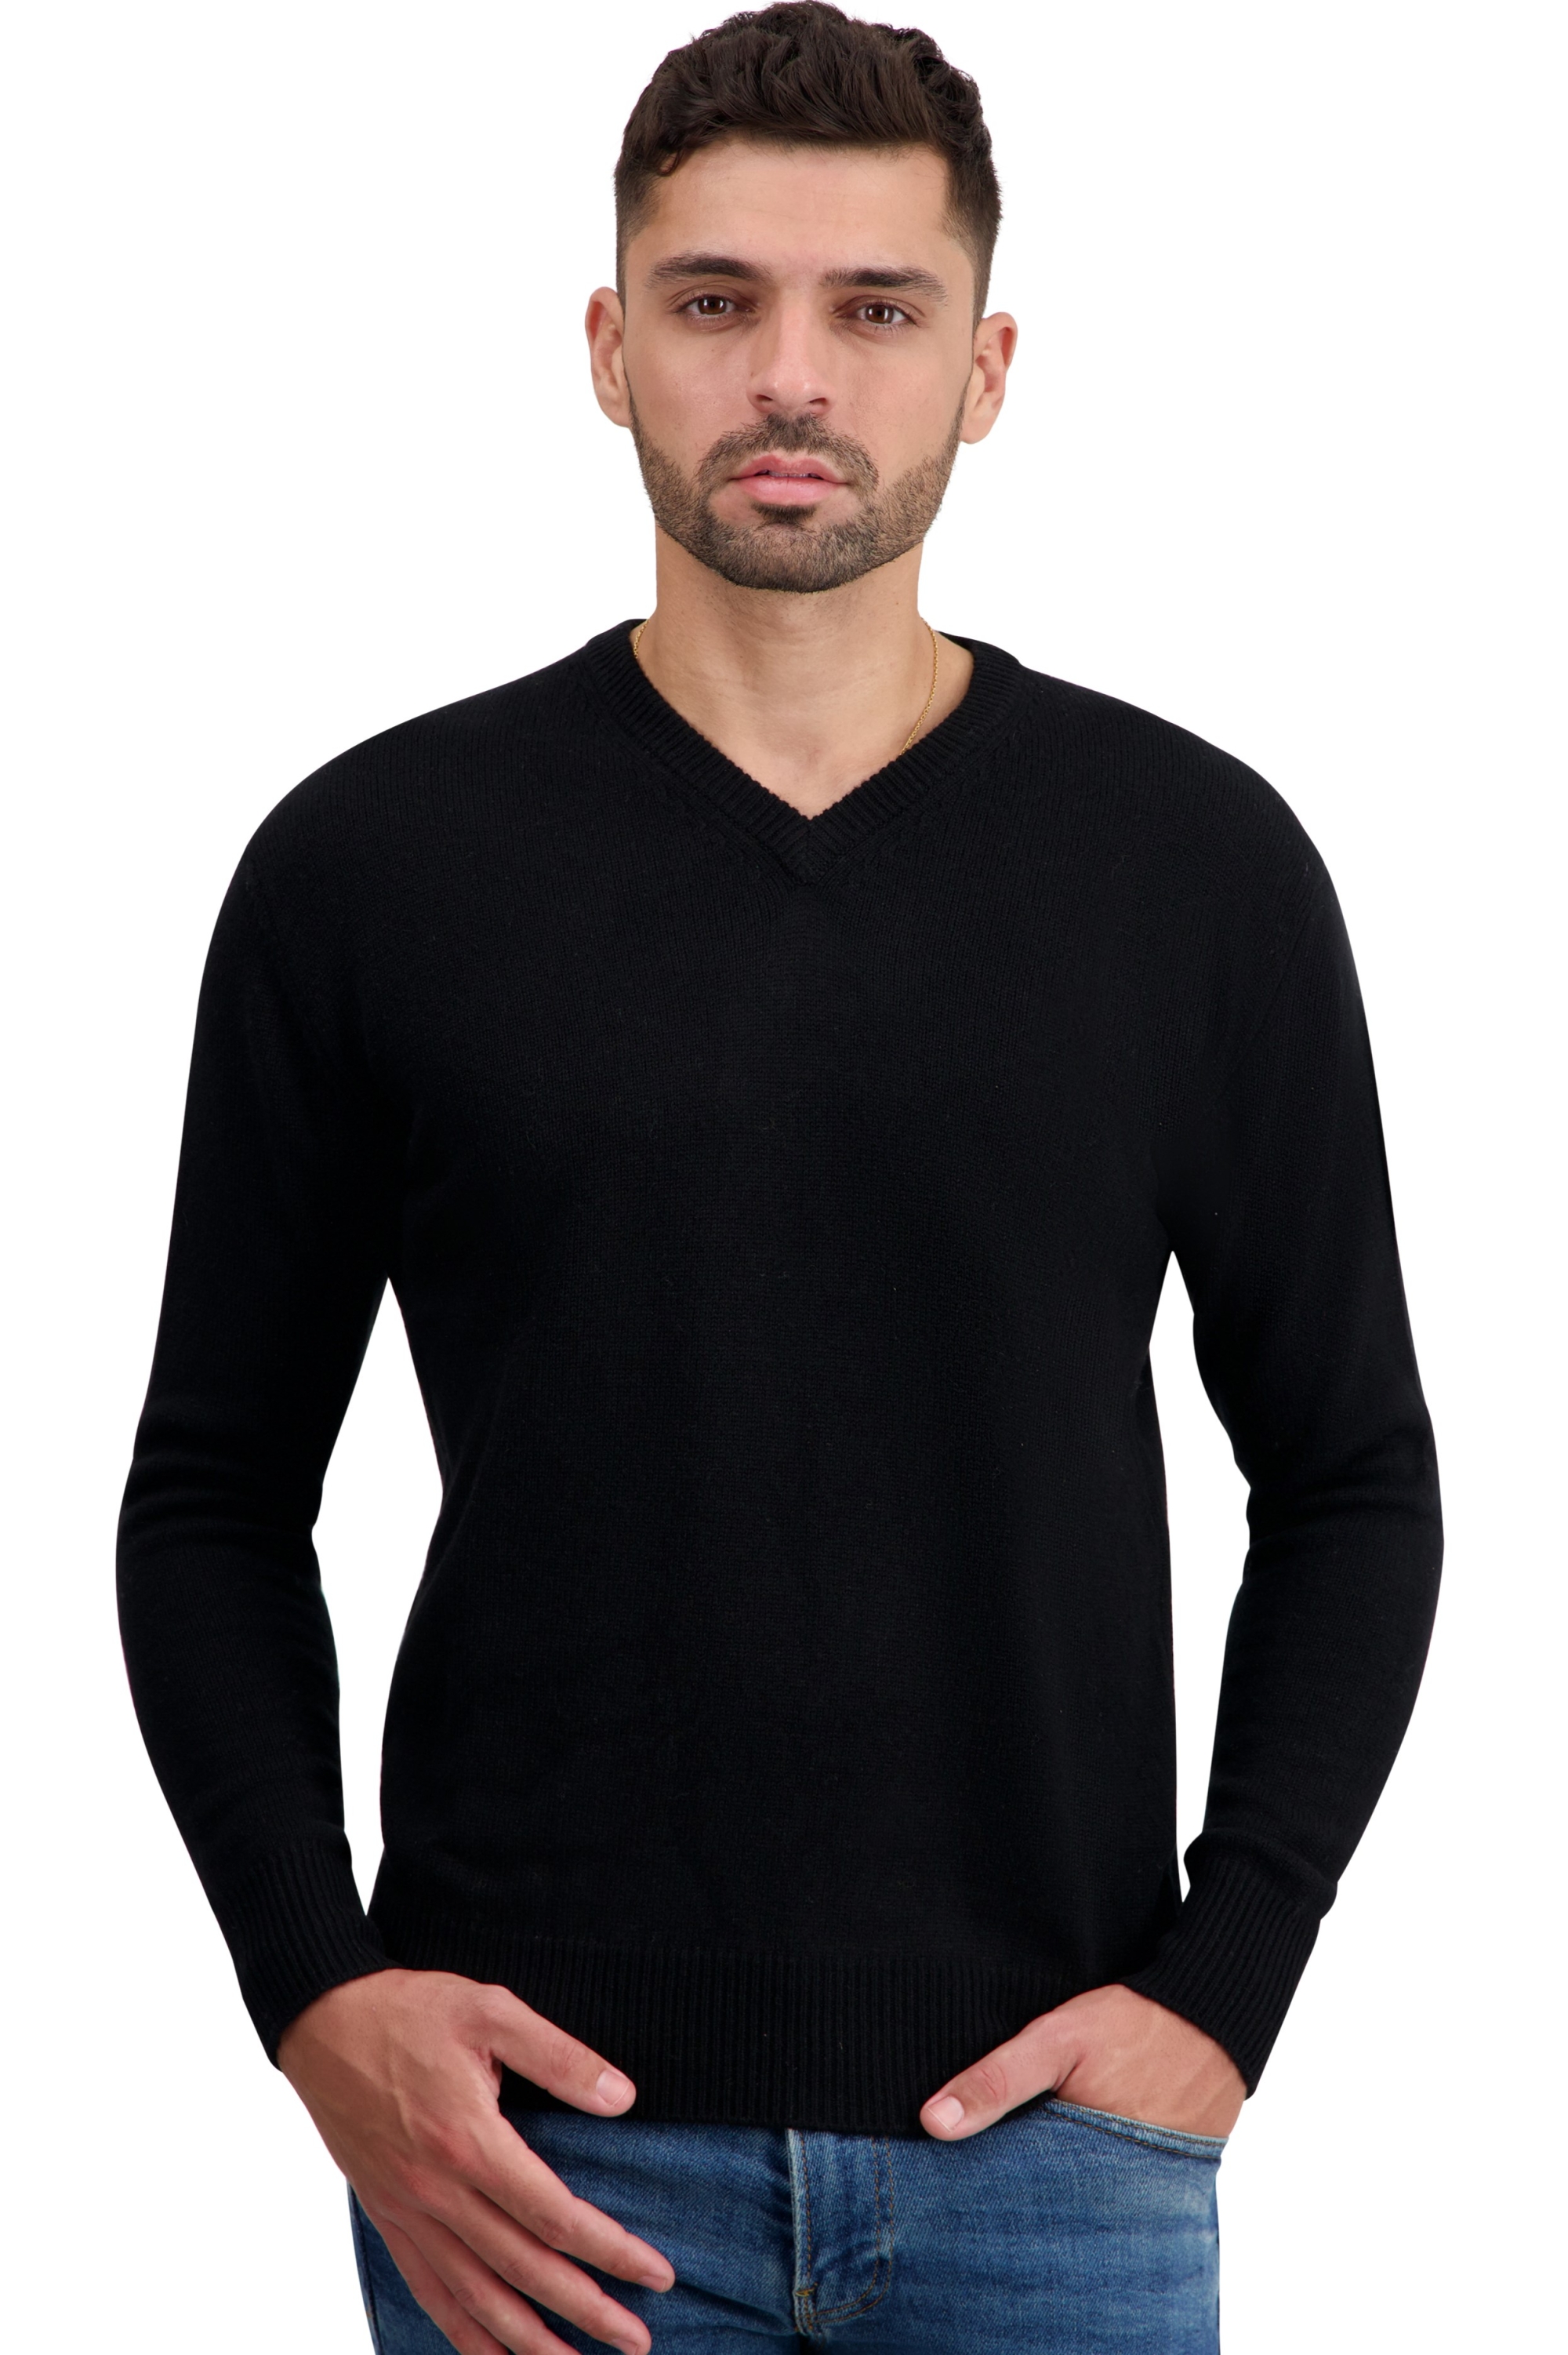 Cashmere men basic sweaters at low prices tour first black 2xl